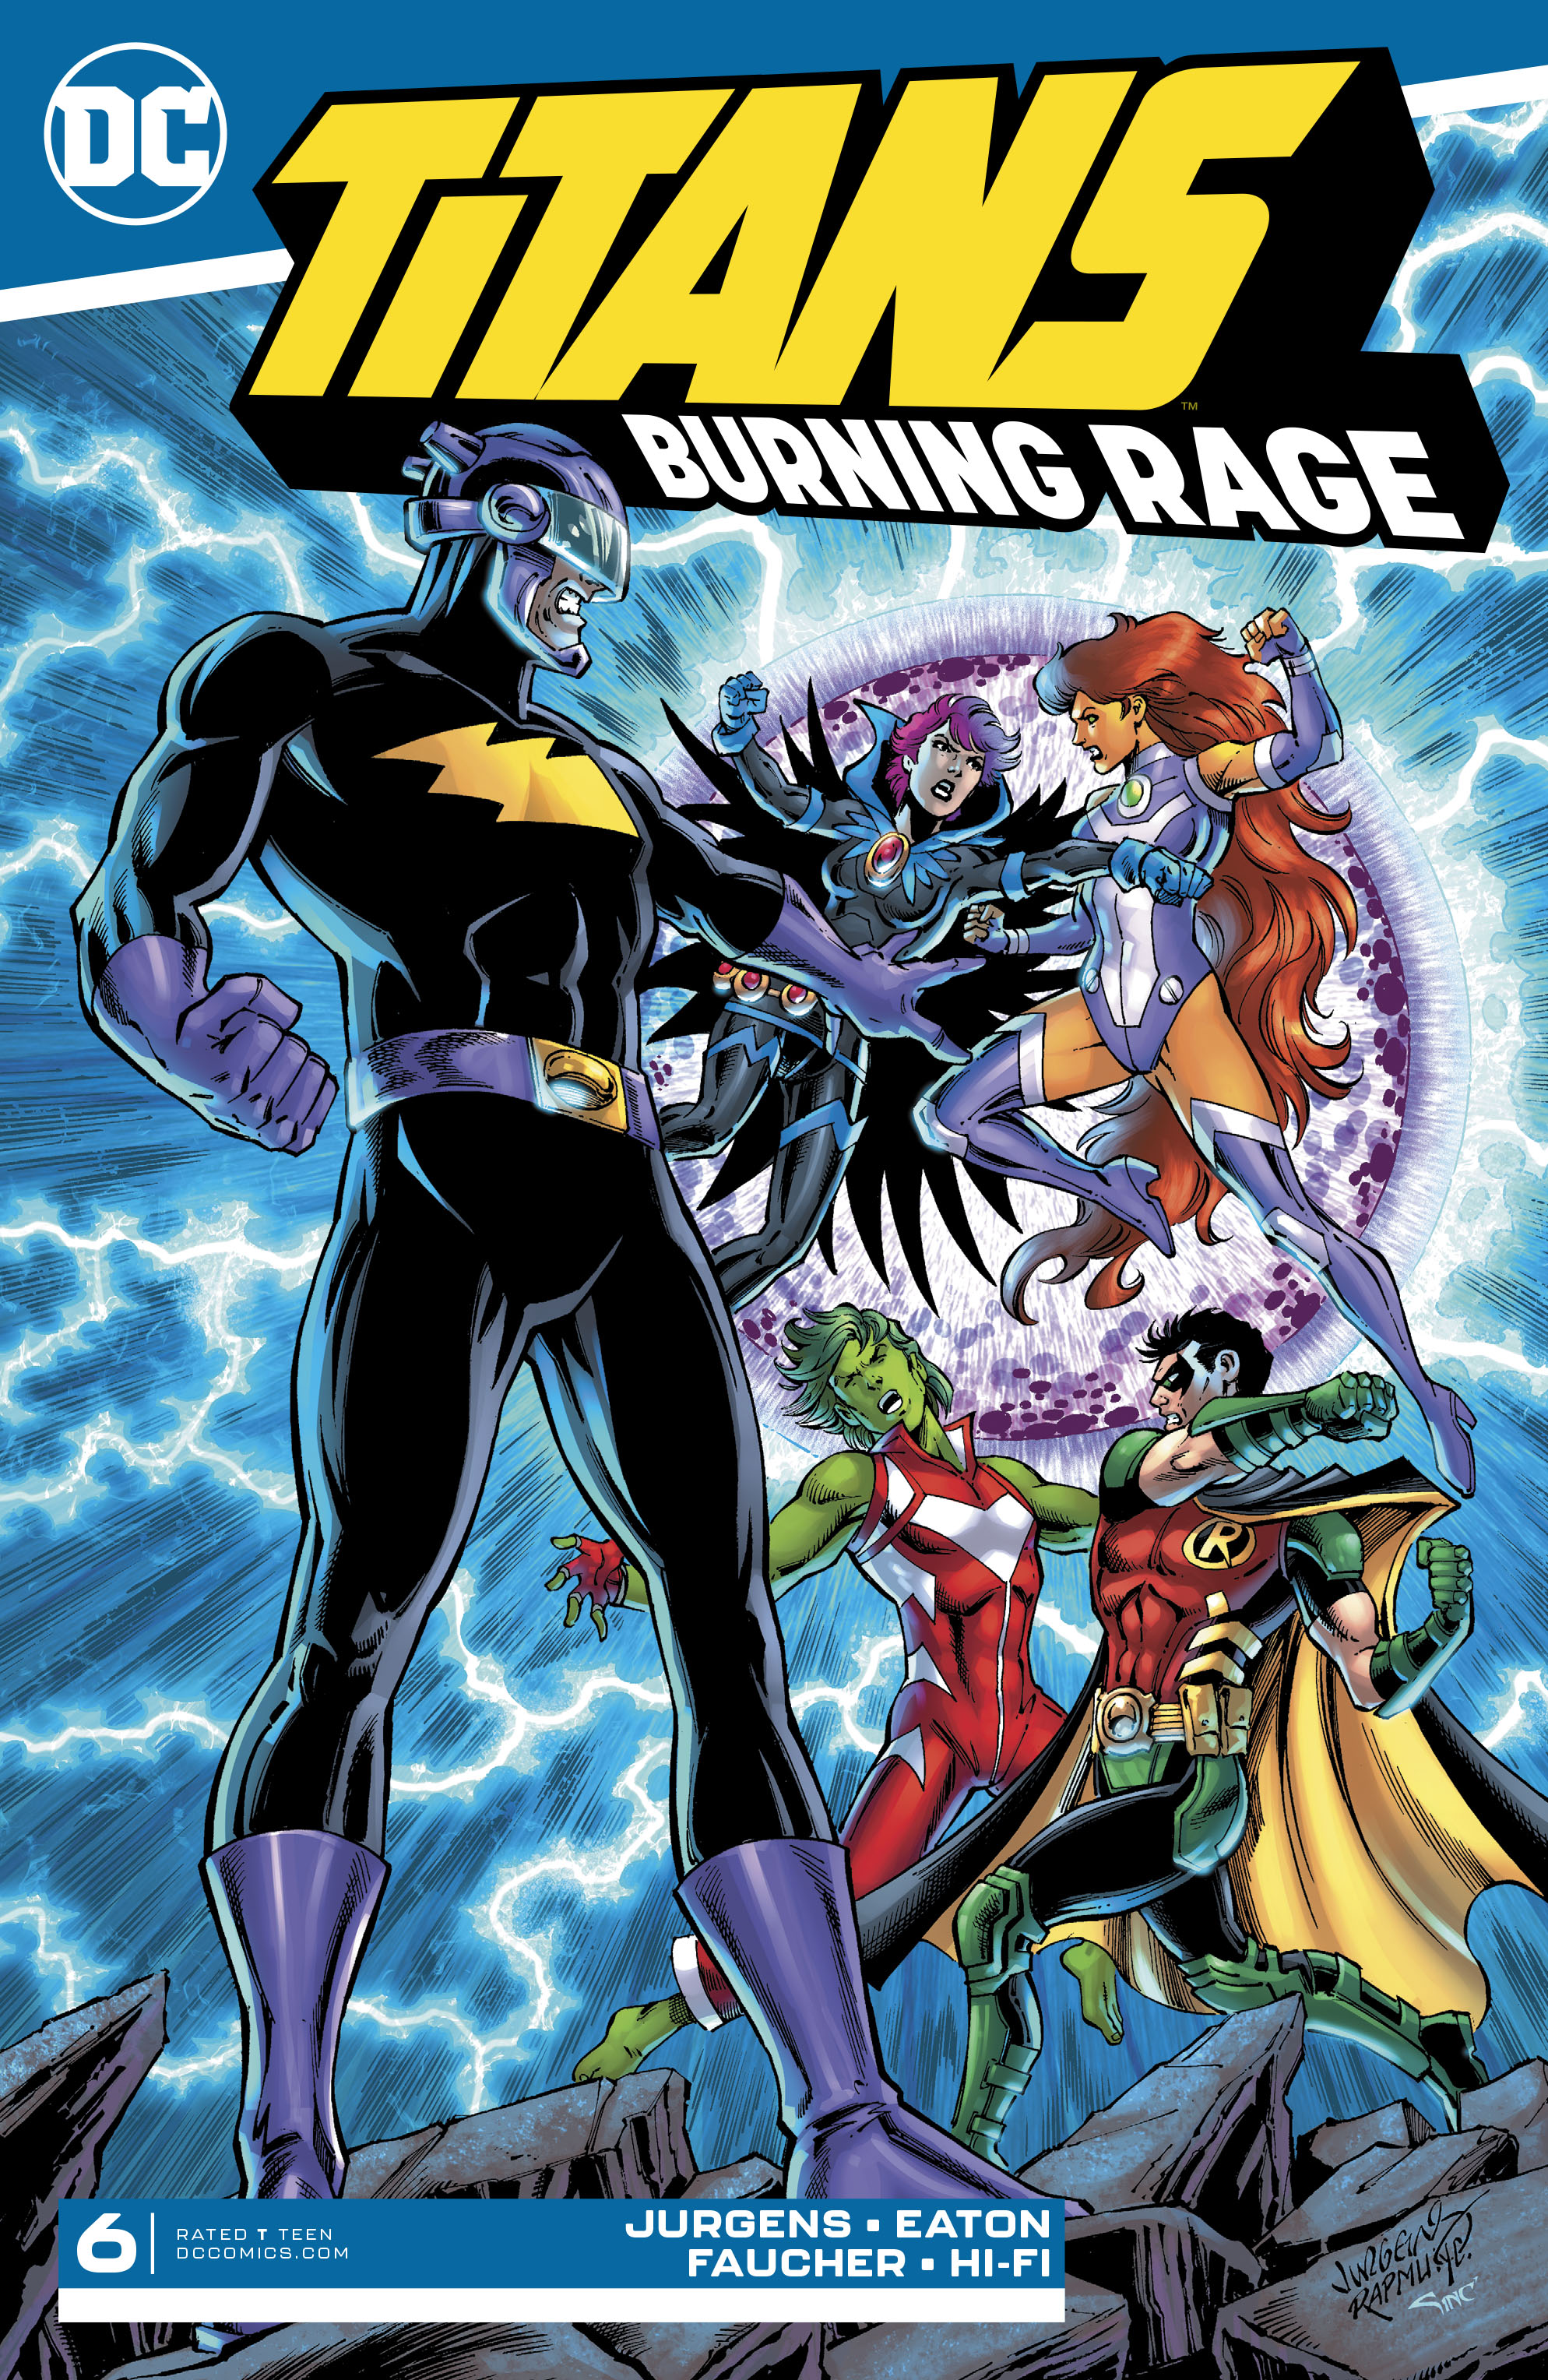 Read online Titans: Burning Rage comic -  Issue #6 - 1